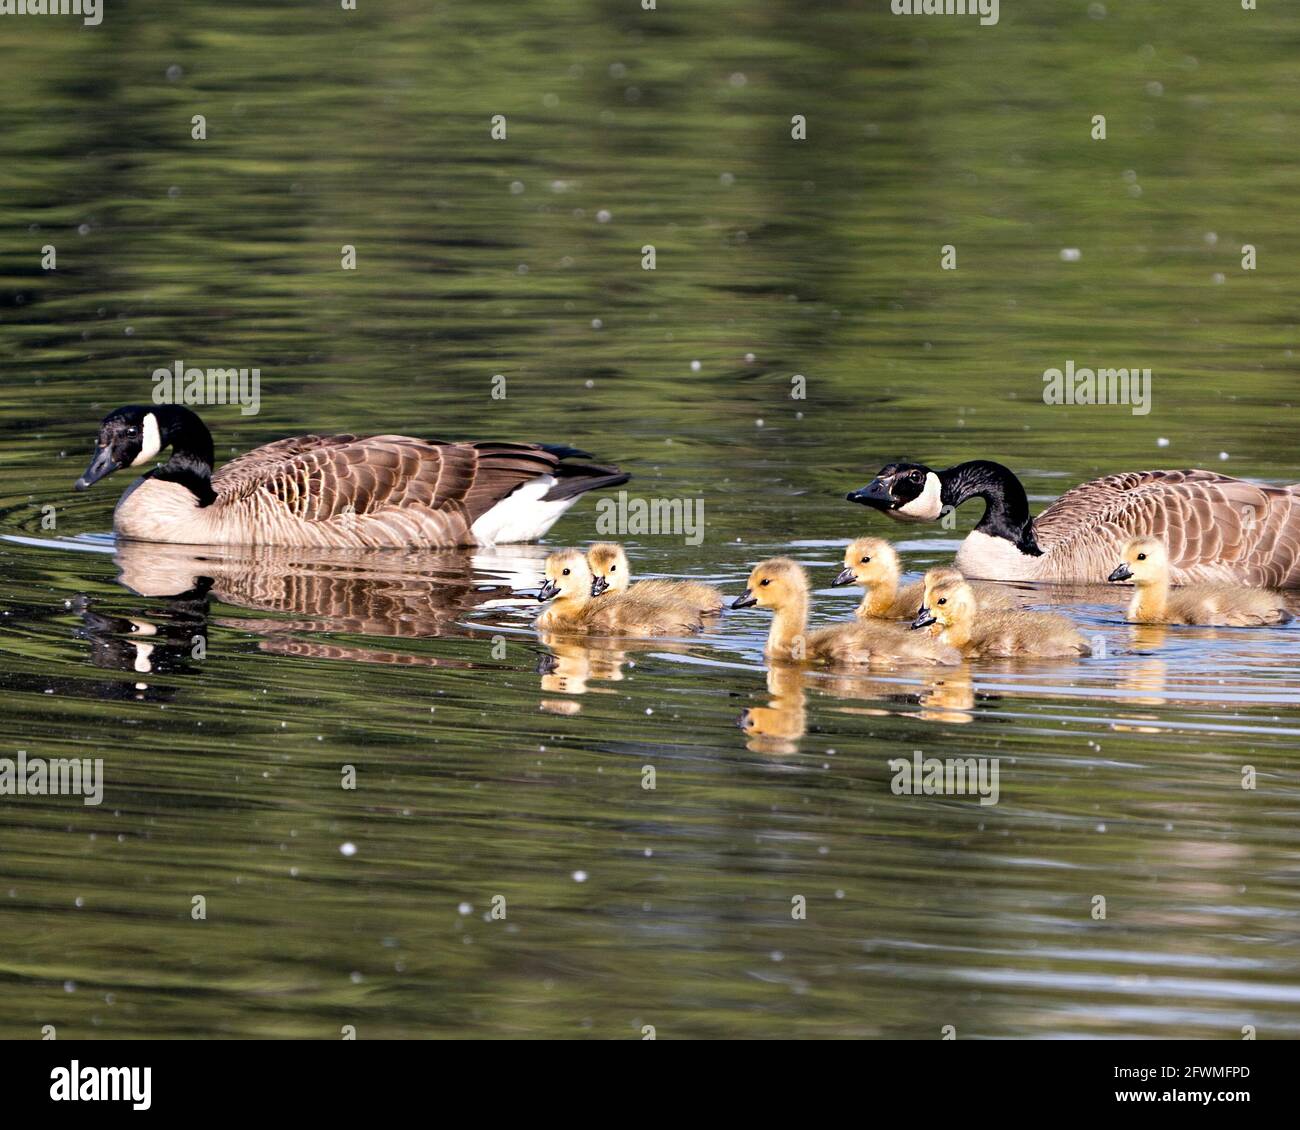 Canadian Geese with their gosling babies swimming and displaying their wings, head, neck, beak, plumage in their environment. Canada Geese. Family. Stock Photo